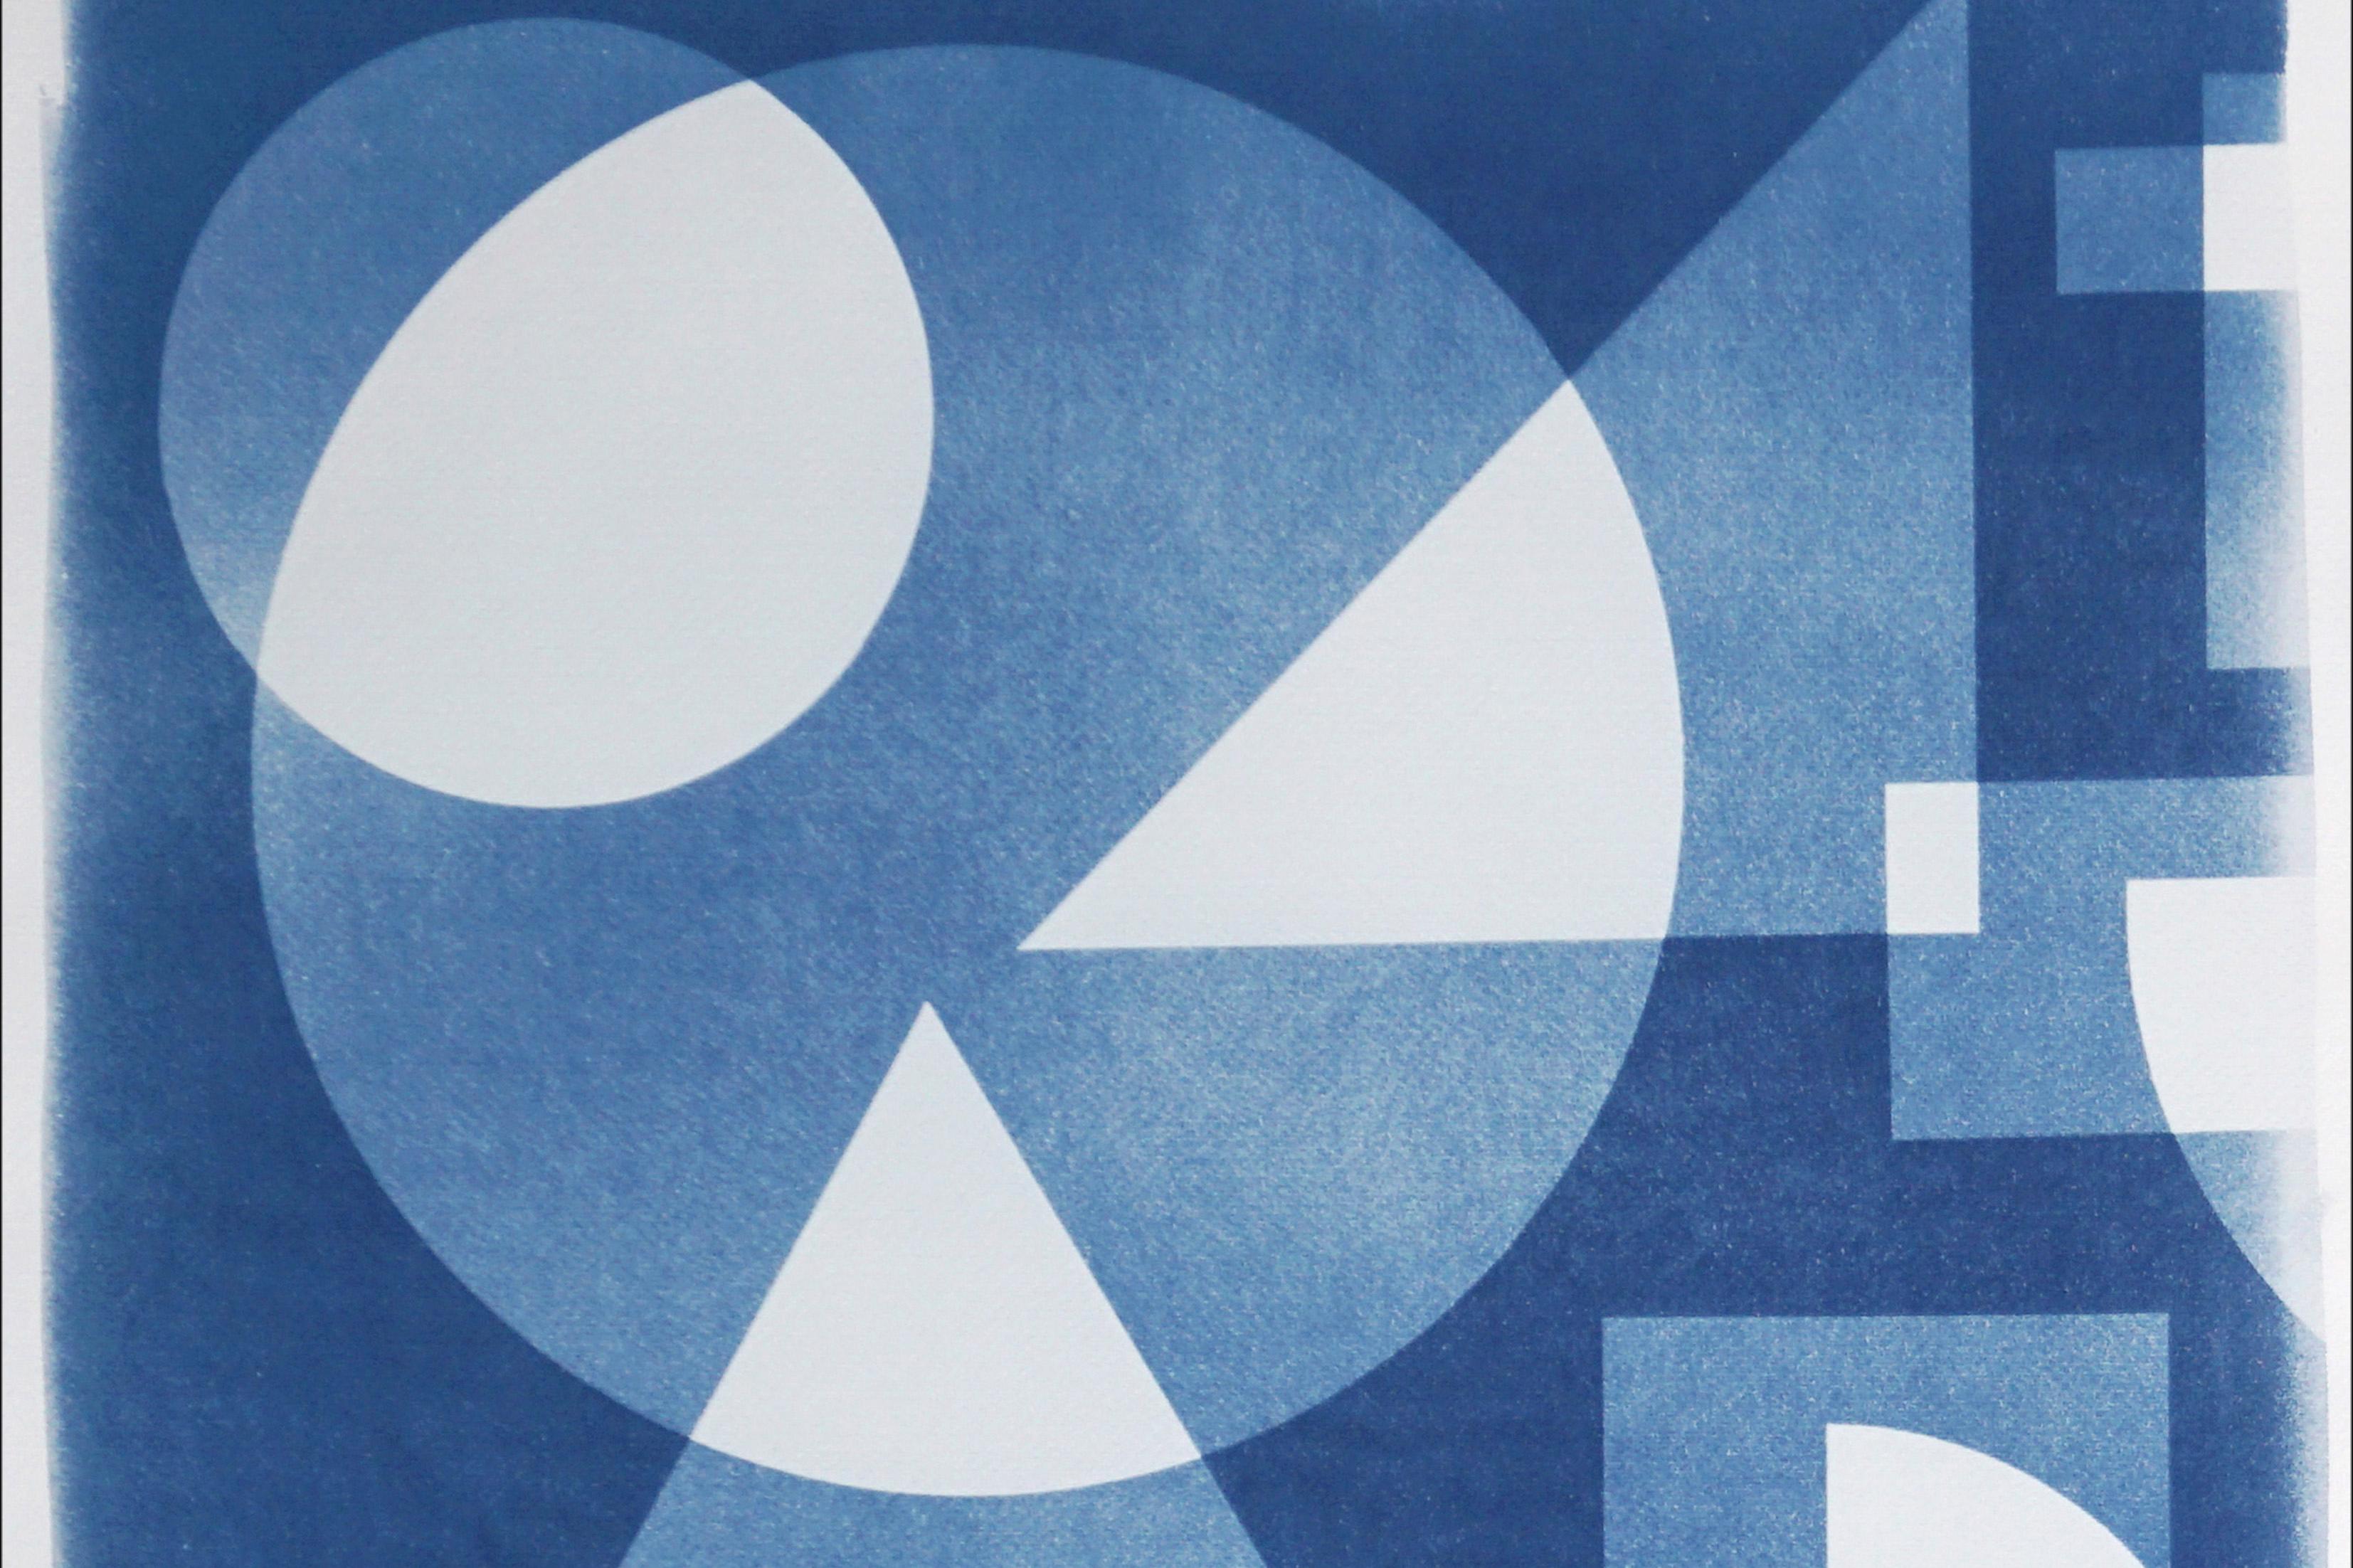 This is an exclusive handprinted unique cyanotype on watercolor paper.
This diptych gets its inspiration from mid-century modern shapes and compositions. It's made by layering paper cutouts and different exposures using uv-light.

Details:
+ Title: